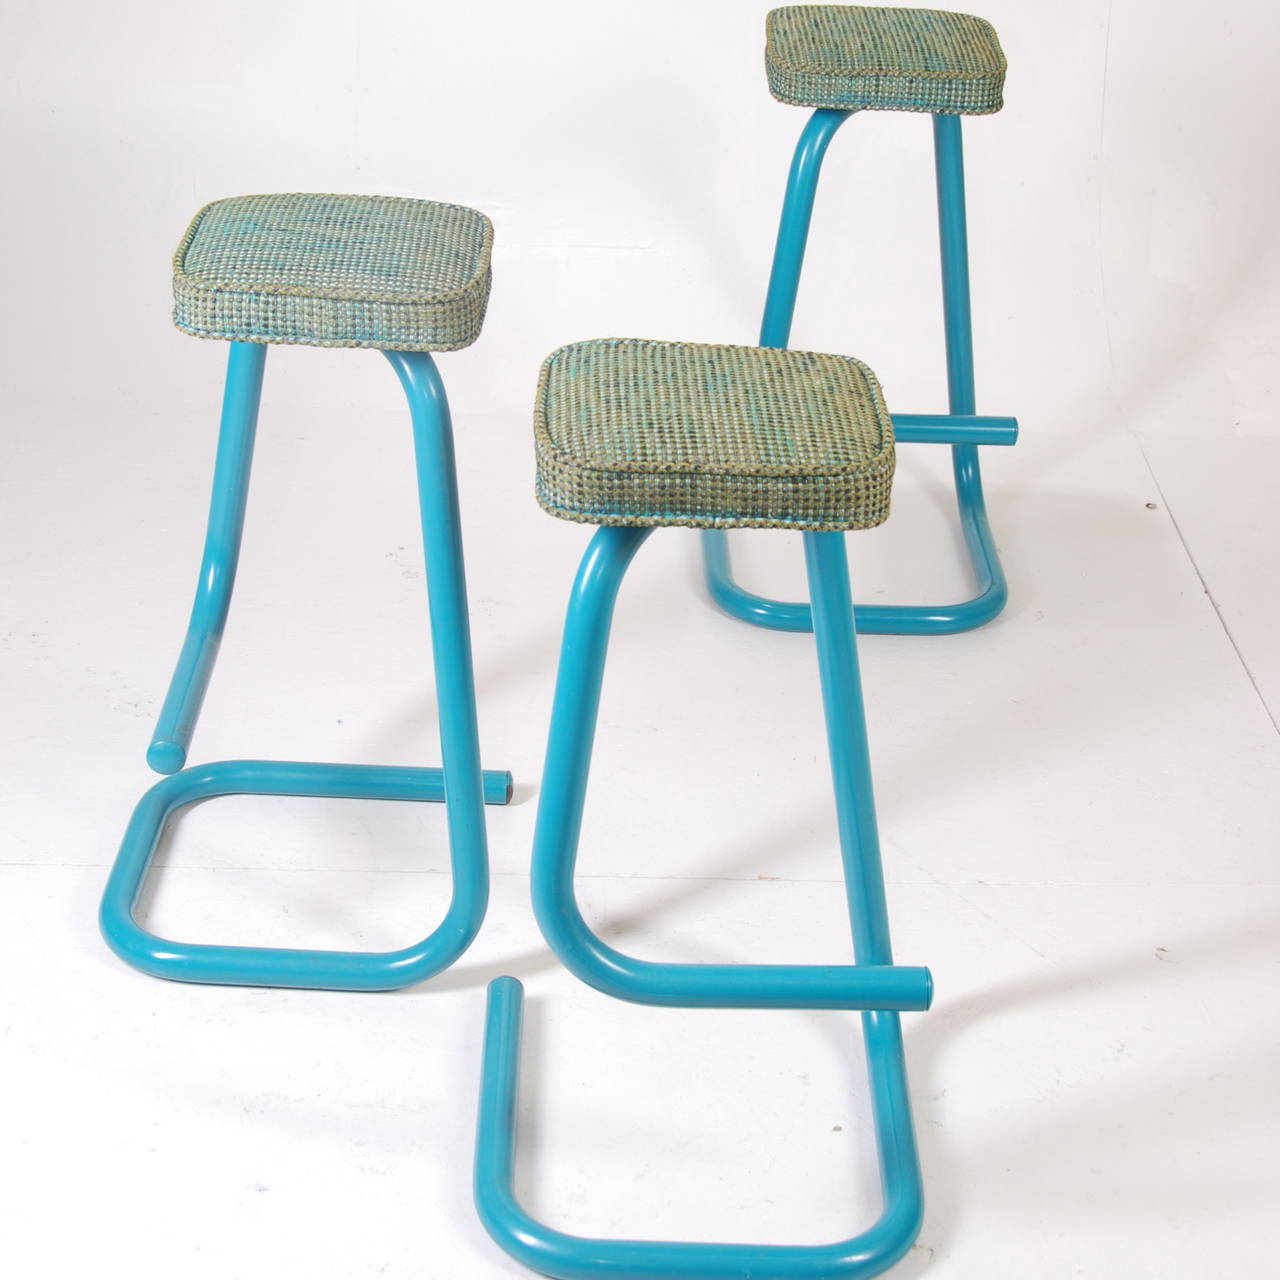 Vintage K700 Stools designed by Hugh Hamilton and Philip Salmon in 1969 for Kinetics. Tubular steel in paperclip form. Very good condition.